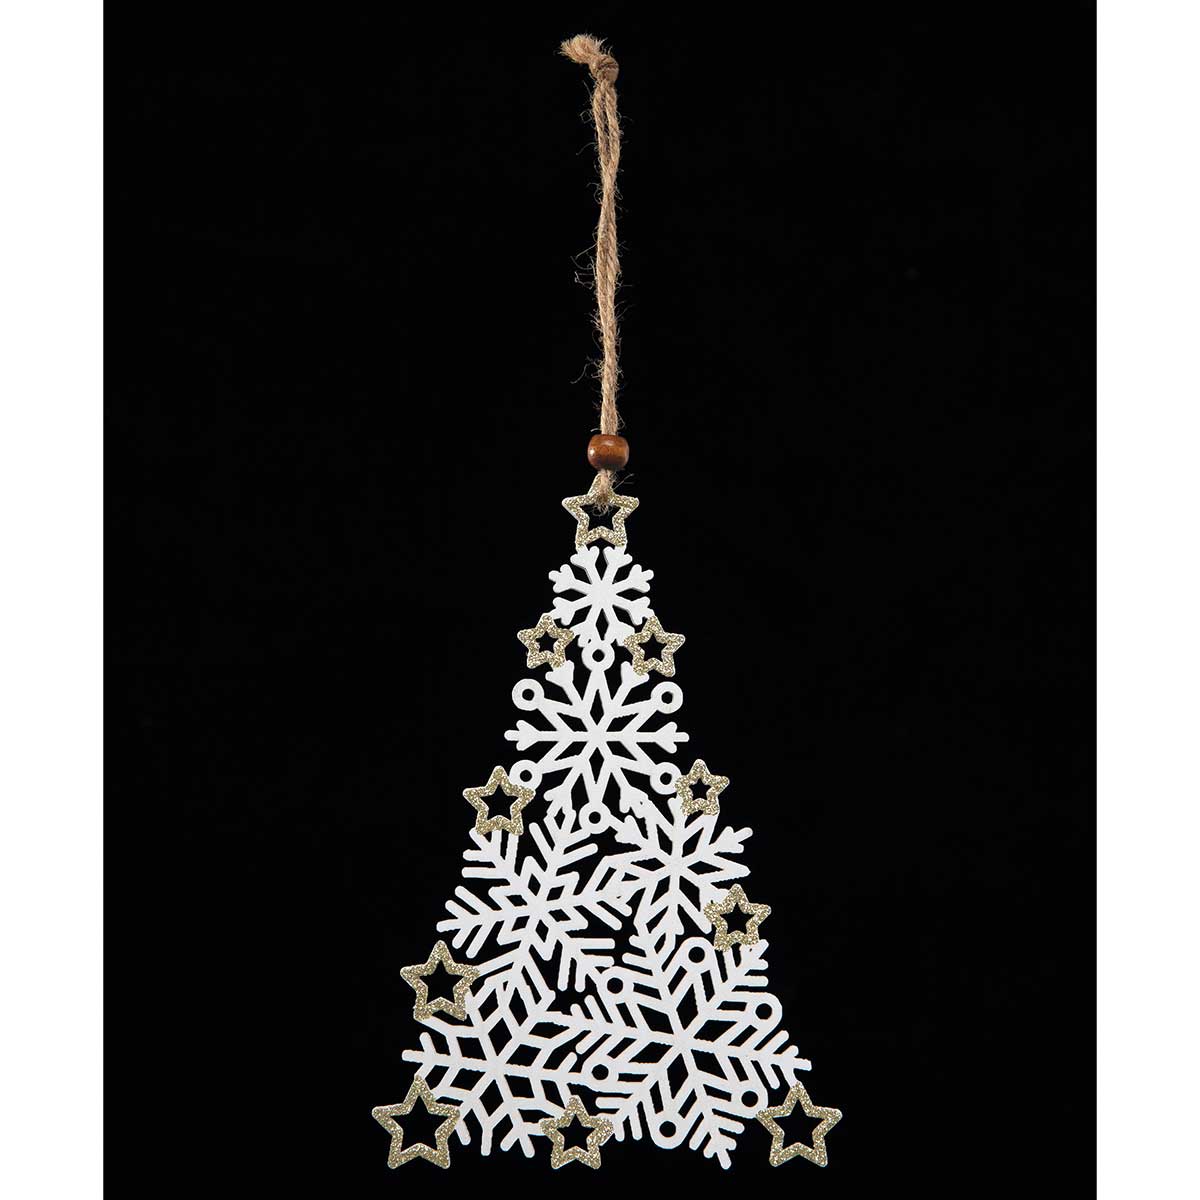 ORNAMENT TREE OF SNOWFLAKES 4.75IN X .25IN X 7.25IN